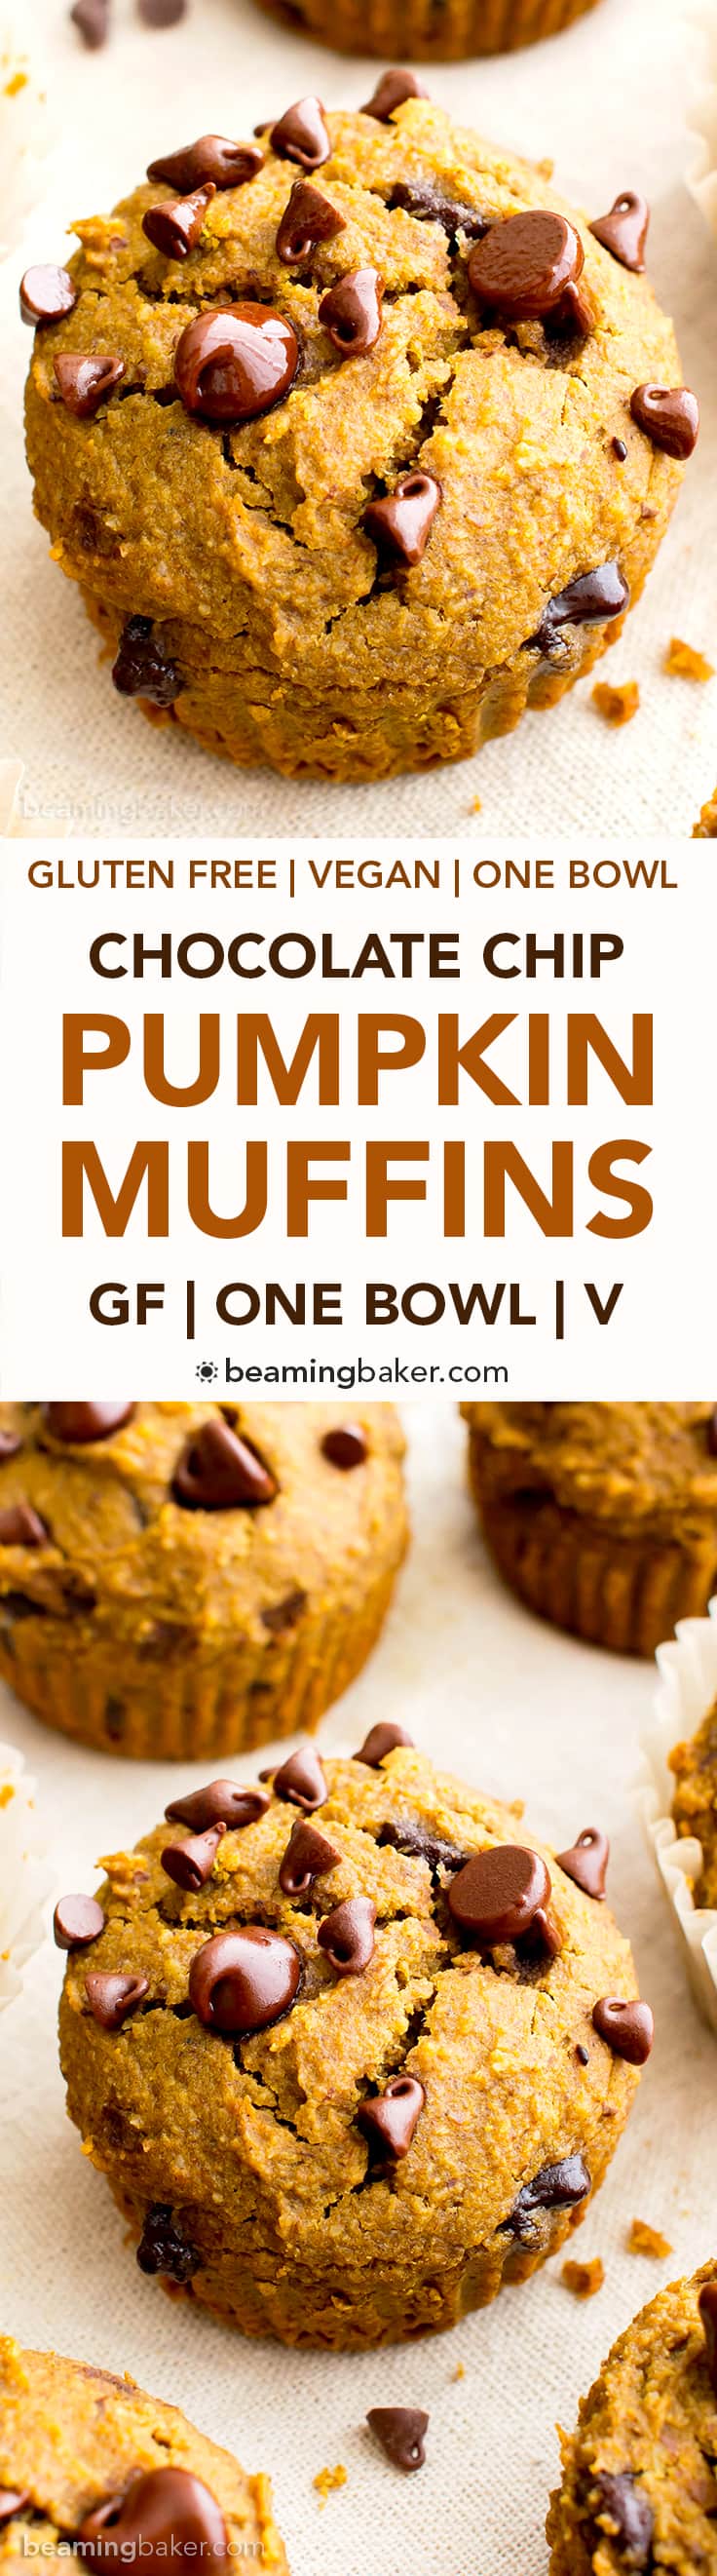 One Bowl Gluten Free Pumpkin Chocolate Chip Muffins (V, GF, DF): a one bowl recipe for perfectly moist pumpkin chocolate chip muffins made with whole ingredients. #Vegan #GlutenFree #DairyFree | BeamingBaker.com